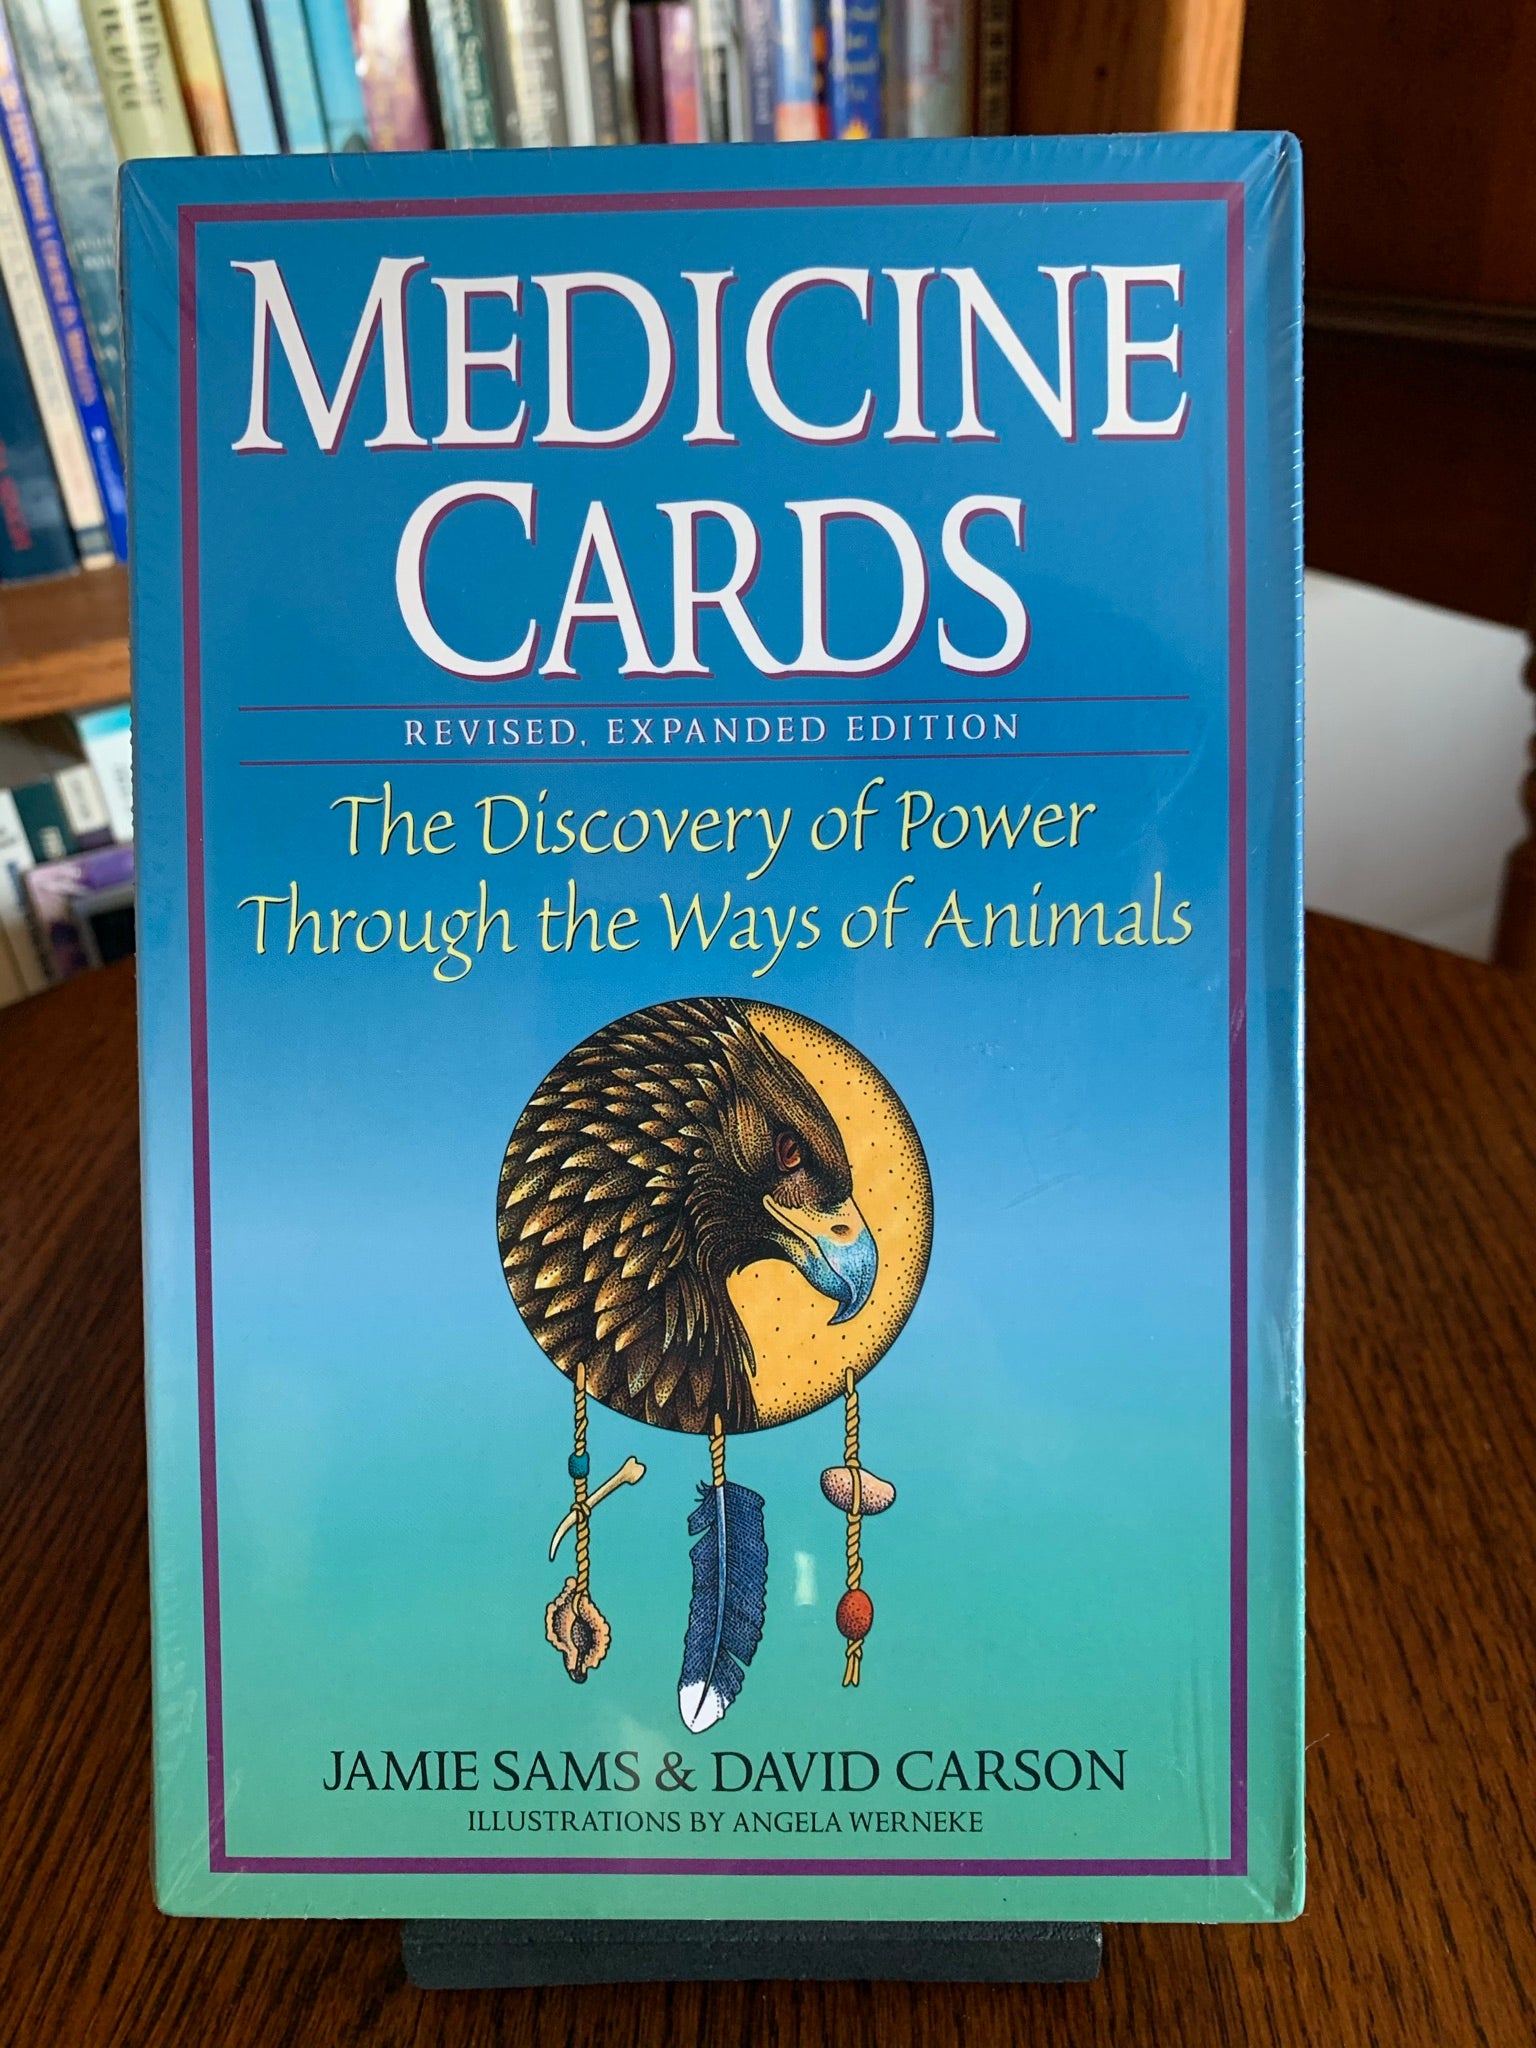 Close-up View/front. Medicine Cards by Jamie Sams and David Carson (with beautiful artwork by Angela Werneke) is THE foundational animal oracle deck. It includes 52 cards (and several blank cards) plus a companion book with descriptions and drawings. The cards are beautifully illustrated. These cards can be used to do readings, to research animal energies you are drawn to or have encounters with and for help with understanding any issue you may want to resolve. Price is $29.95.